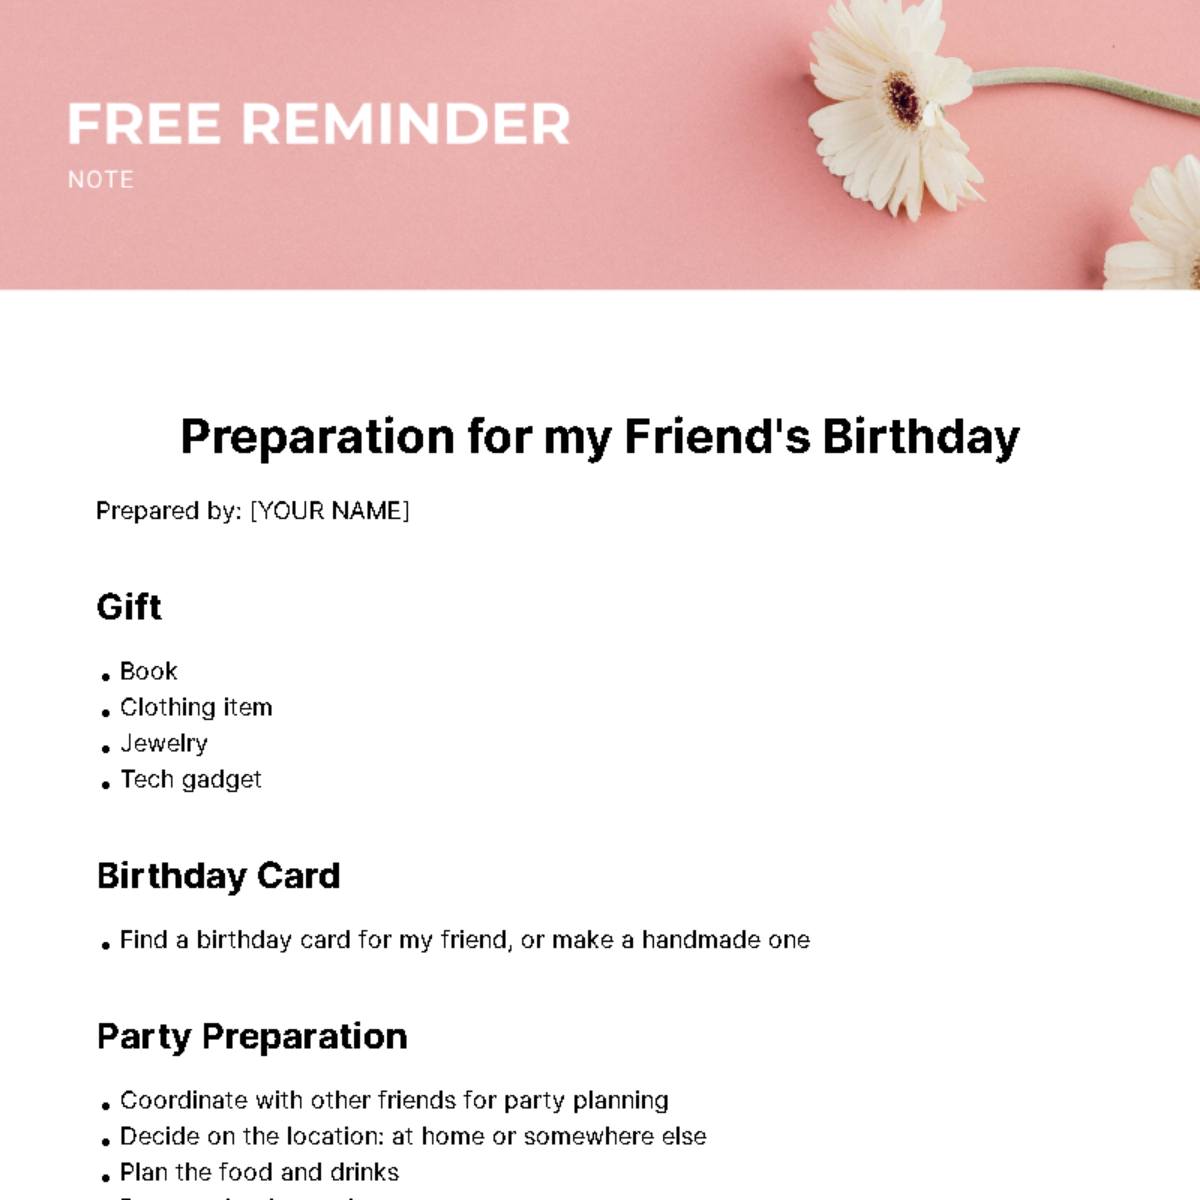 Free Reminder Note Template